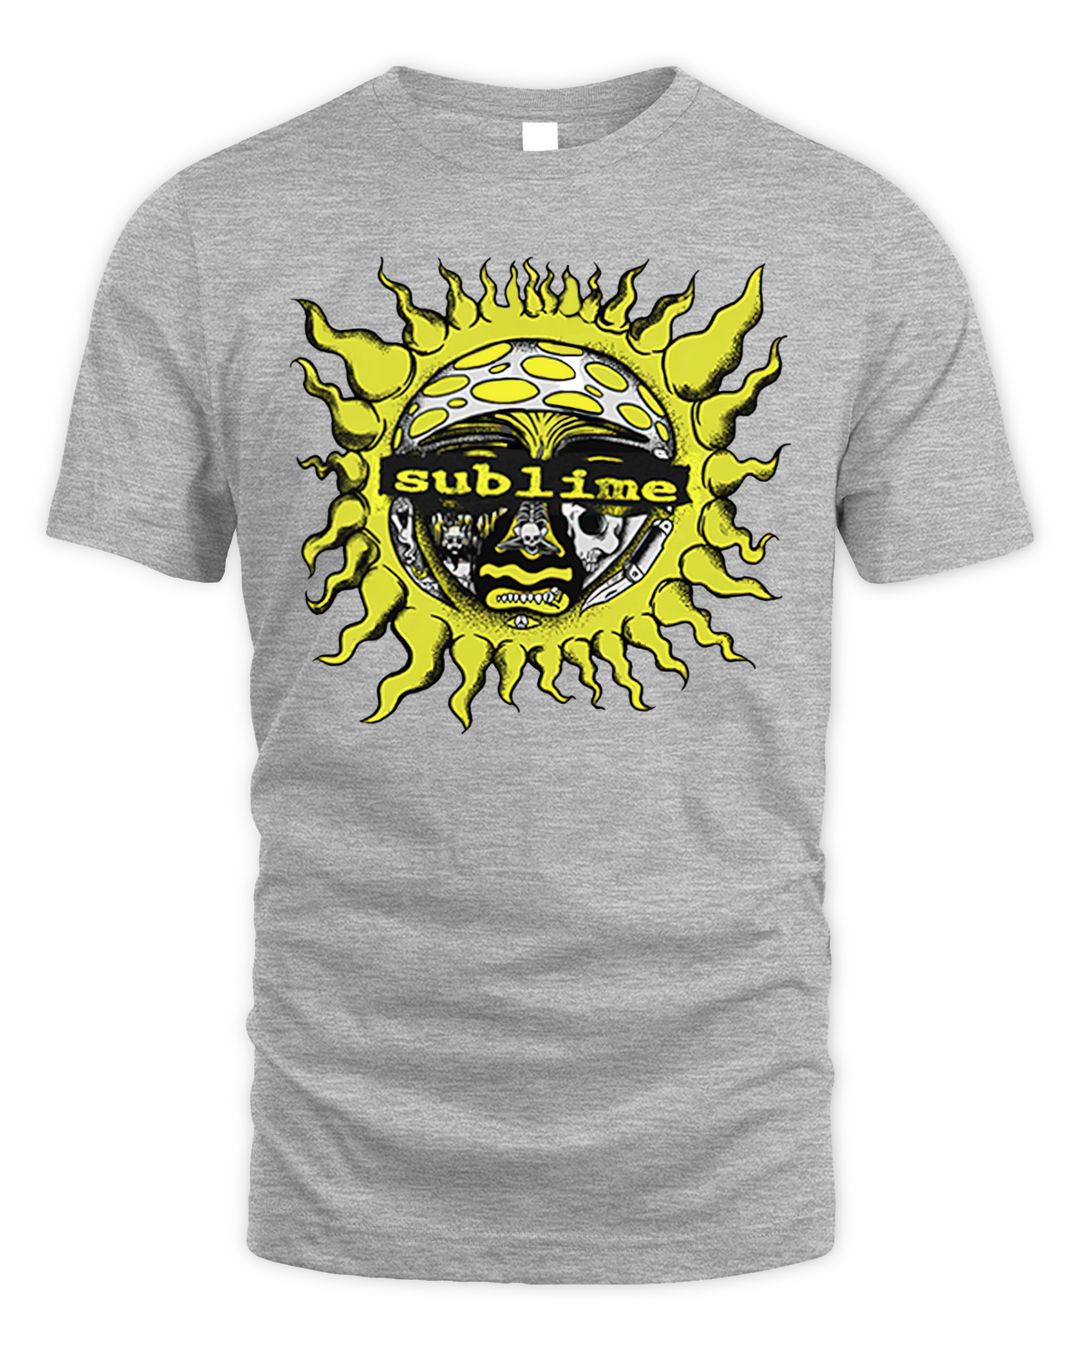 Sublime Merch Mineral Washed Charcoal Shirt